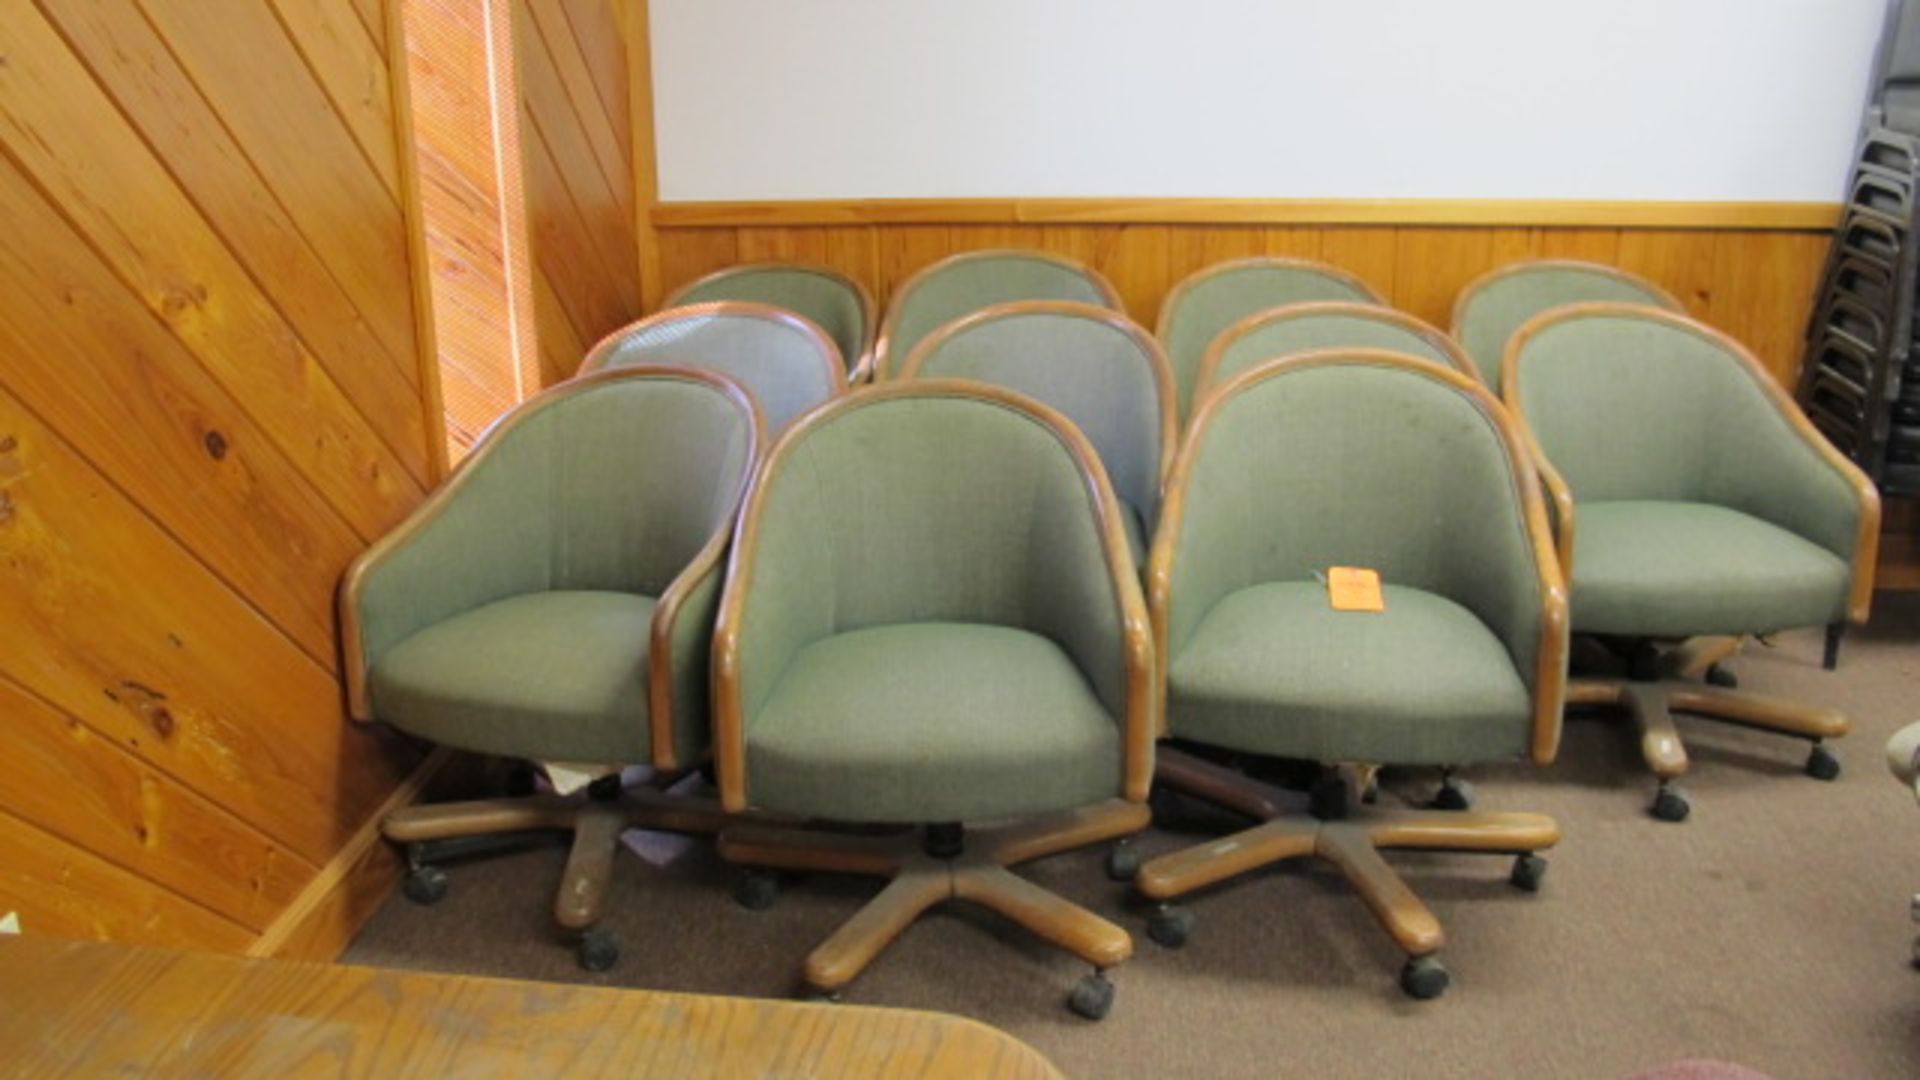 (11) OFFICE CHAIRS